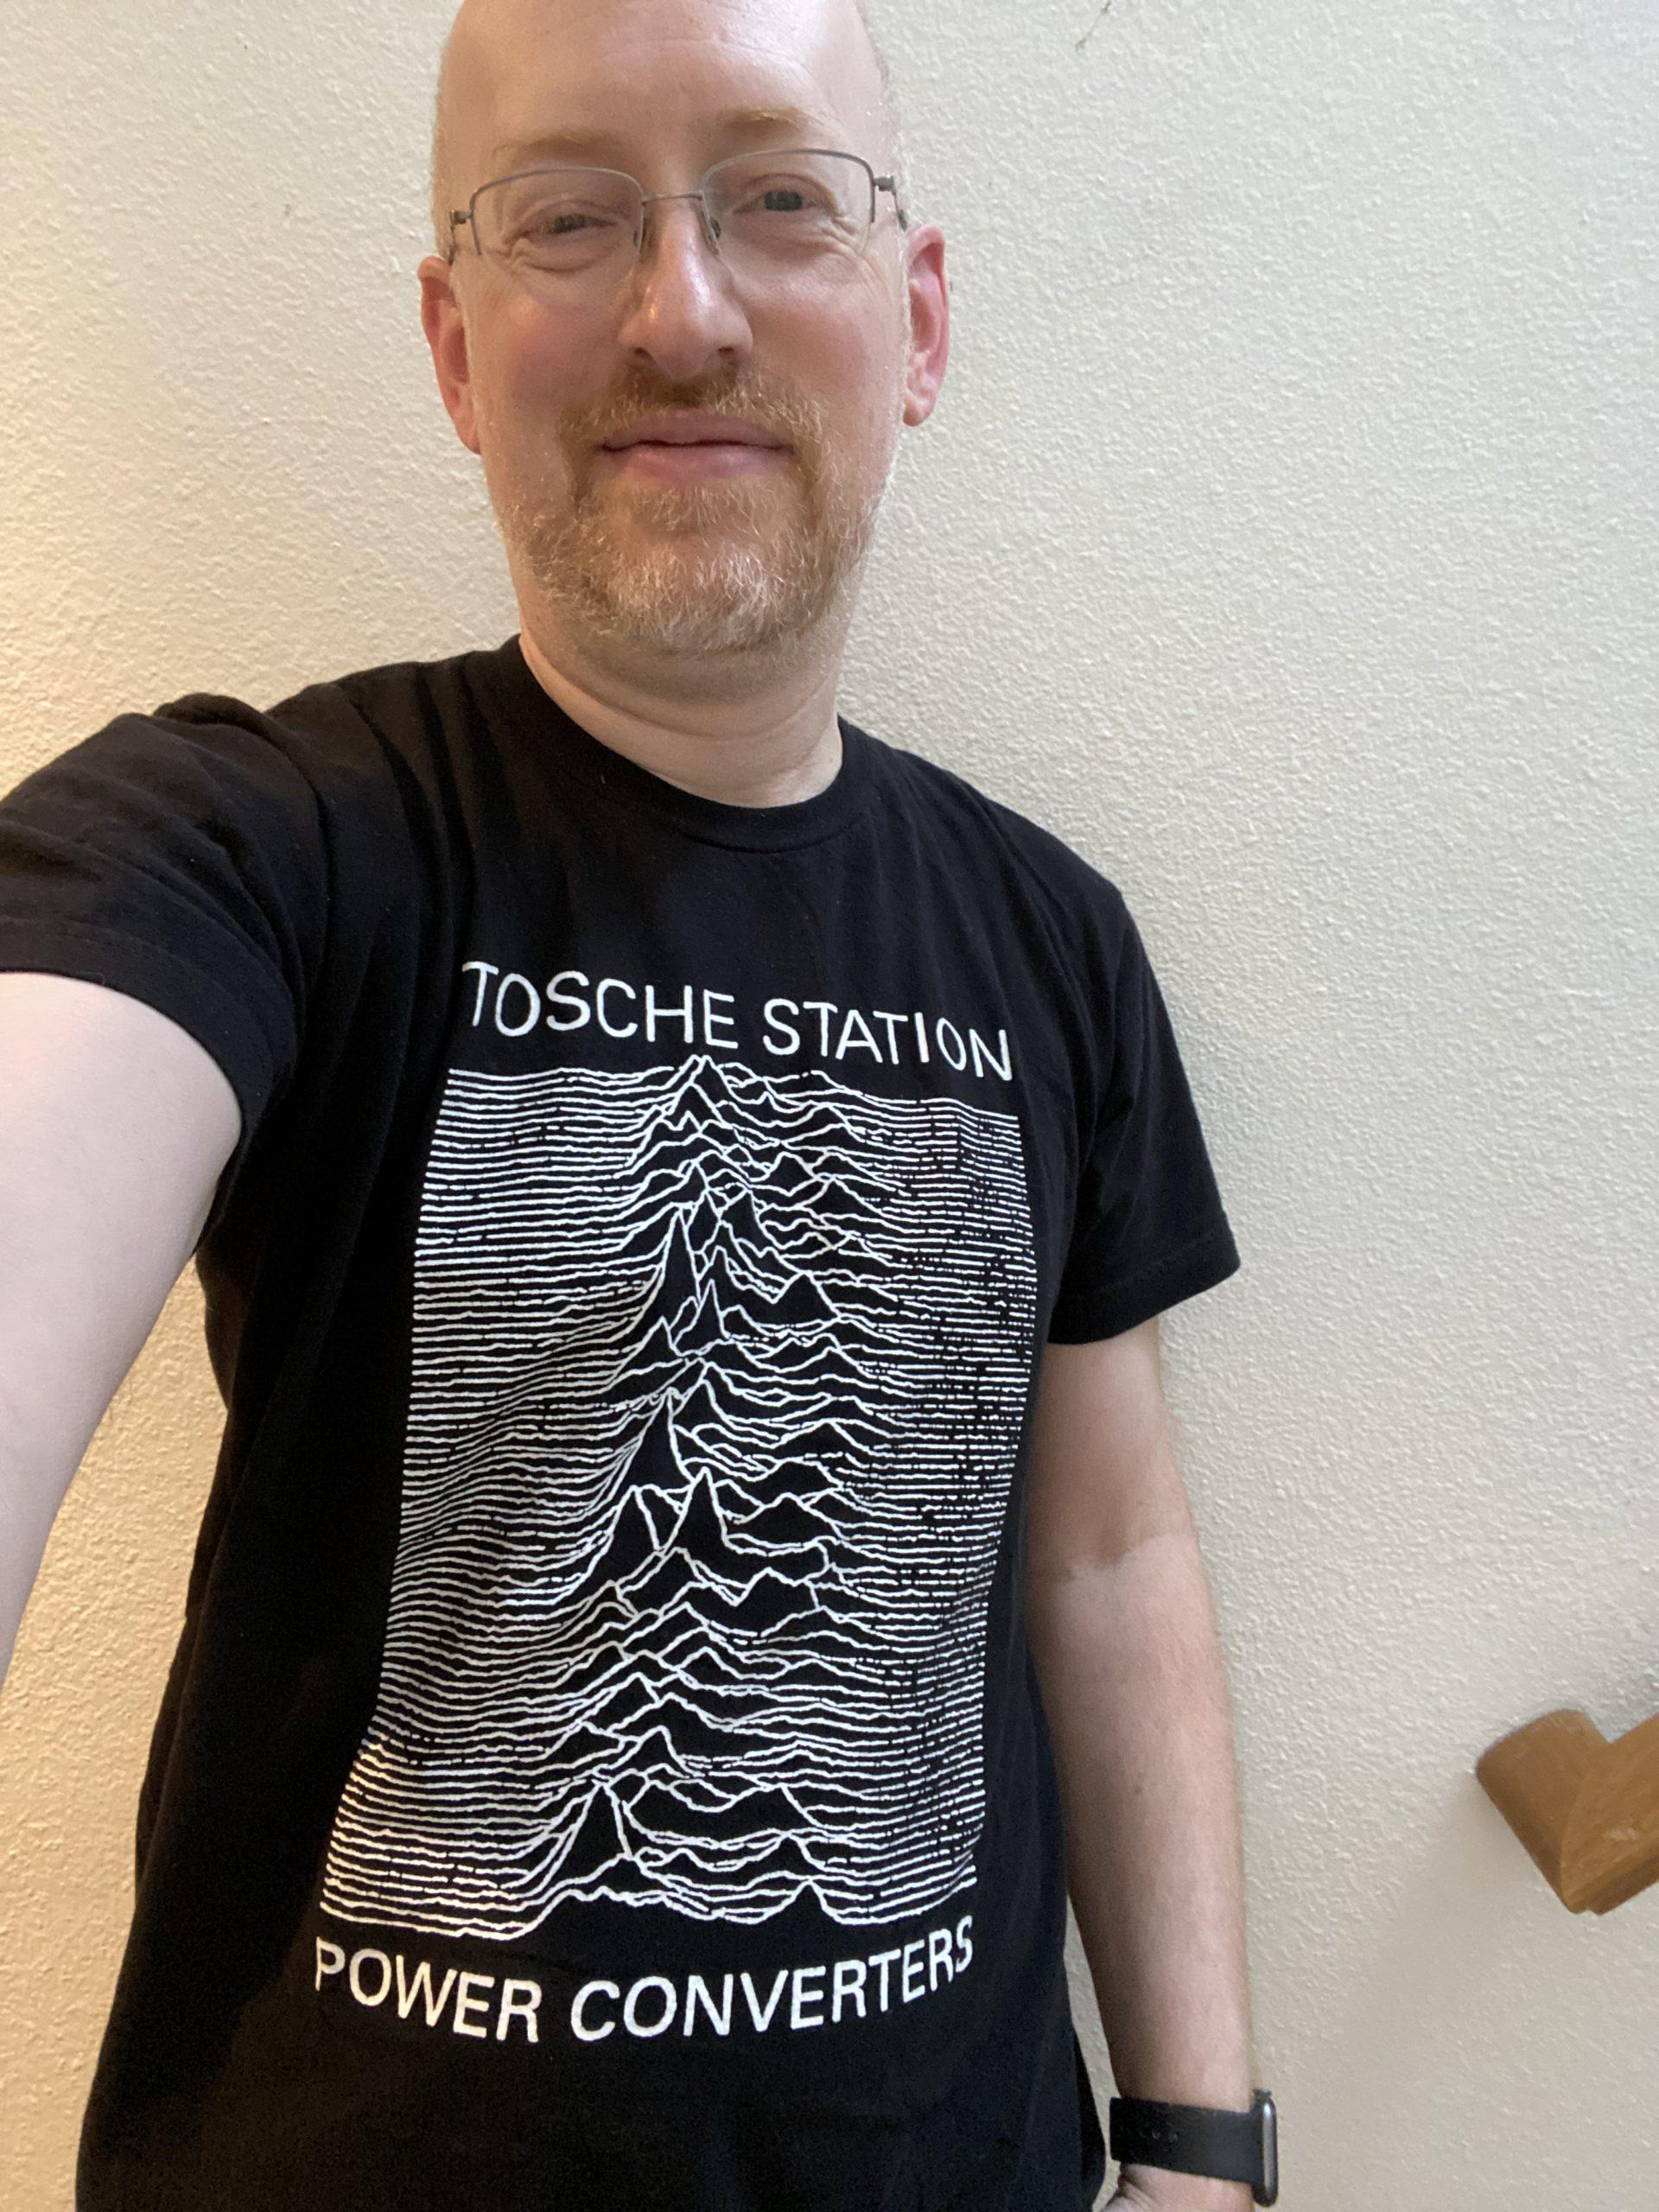 Me standing in front of a white wall, wearing a black t-shirt riffing on the classic Joy Division Unknown Pleasures album artwork, only with text that says Tosche Station / Power Converters.